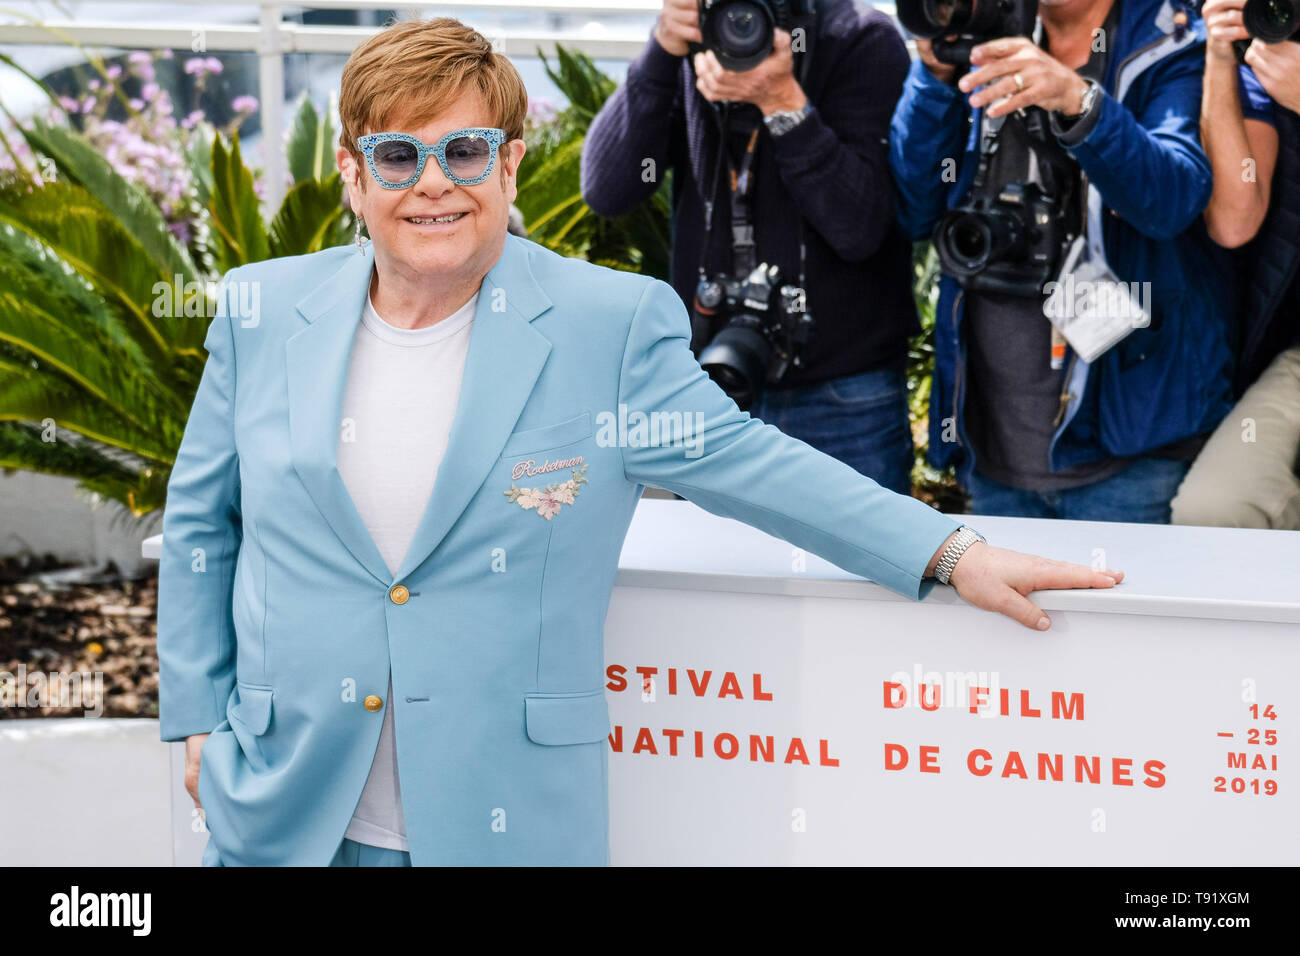 Cannes, France. 16th May, 2019. Elton John poses at a photocall for Rocketman on Thursday 16 May 2019 at the 72nd Festival de Cannes, Palais des Festivals, Cannes. Pictured: Elton John. Picture by Credit: Julie Edwards/Alamy Live News Stock Photo